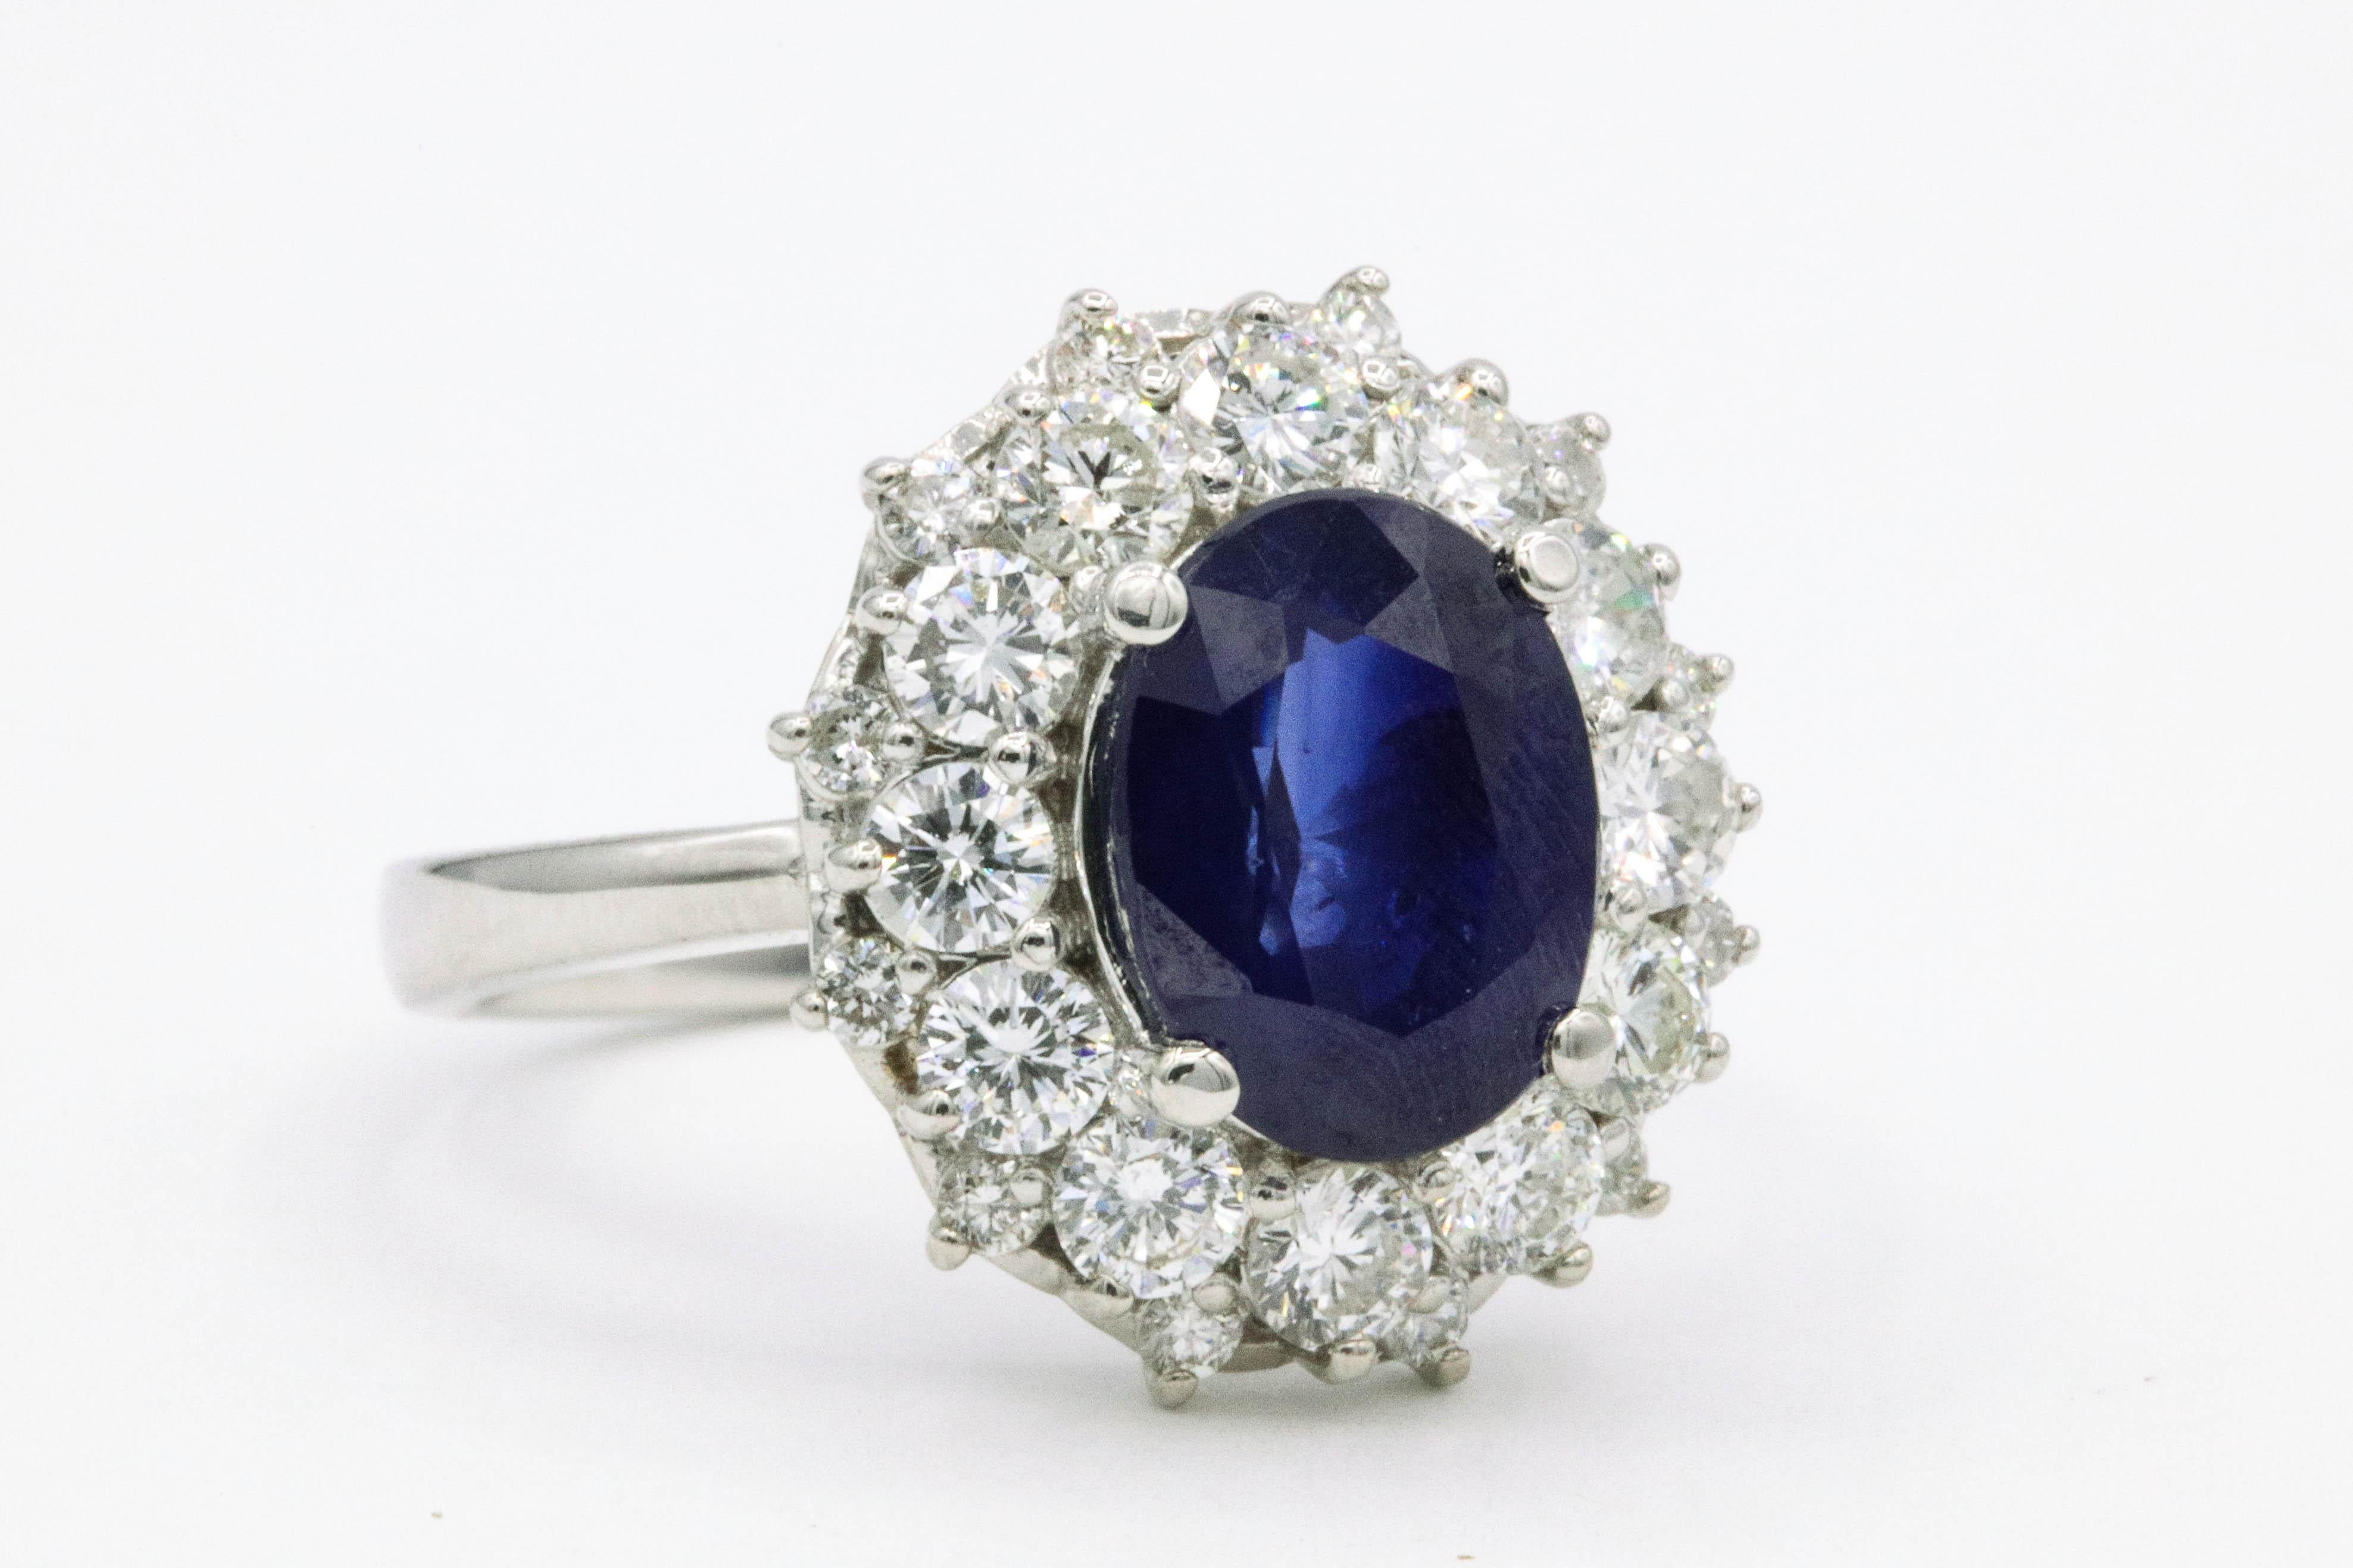 Oval sapphire weighing 3.19 carats surrounded by 24 diamonds weighing 1.40 carats, in 18k white gold. 
Color G-H
Clarity SI
Top of the ring measures 5/6